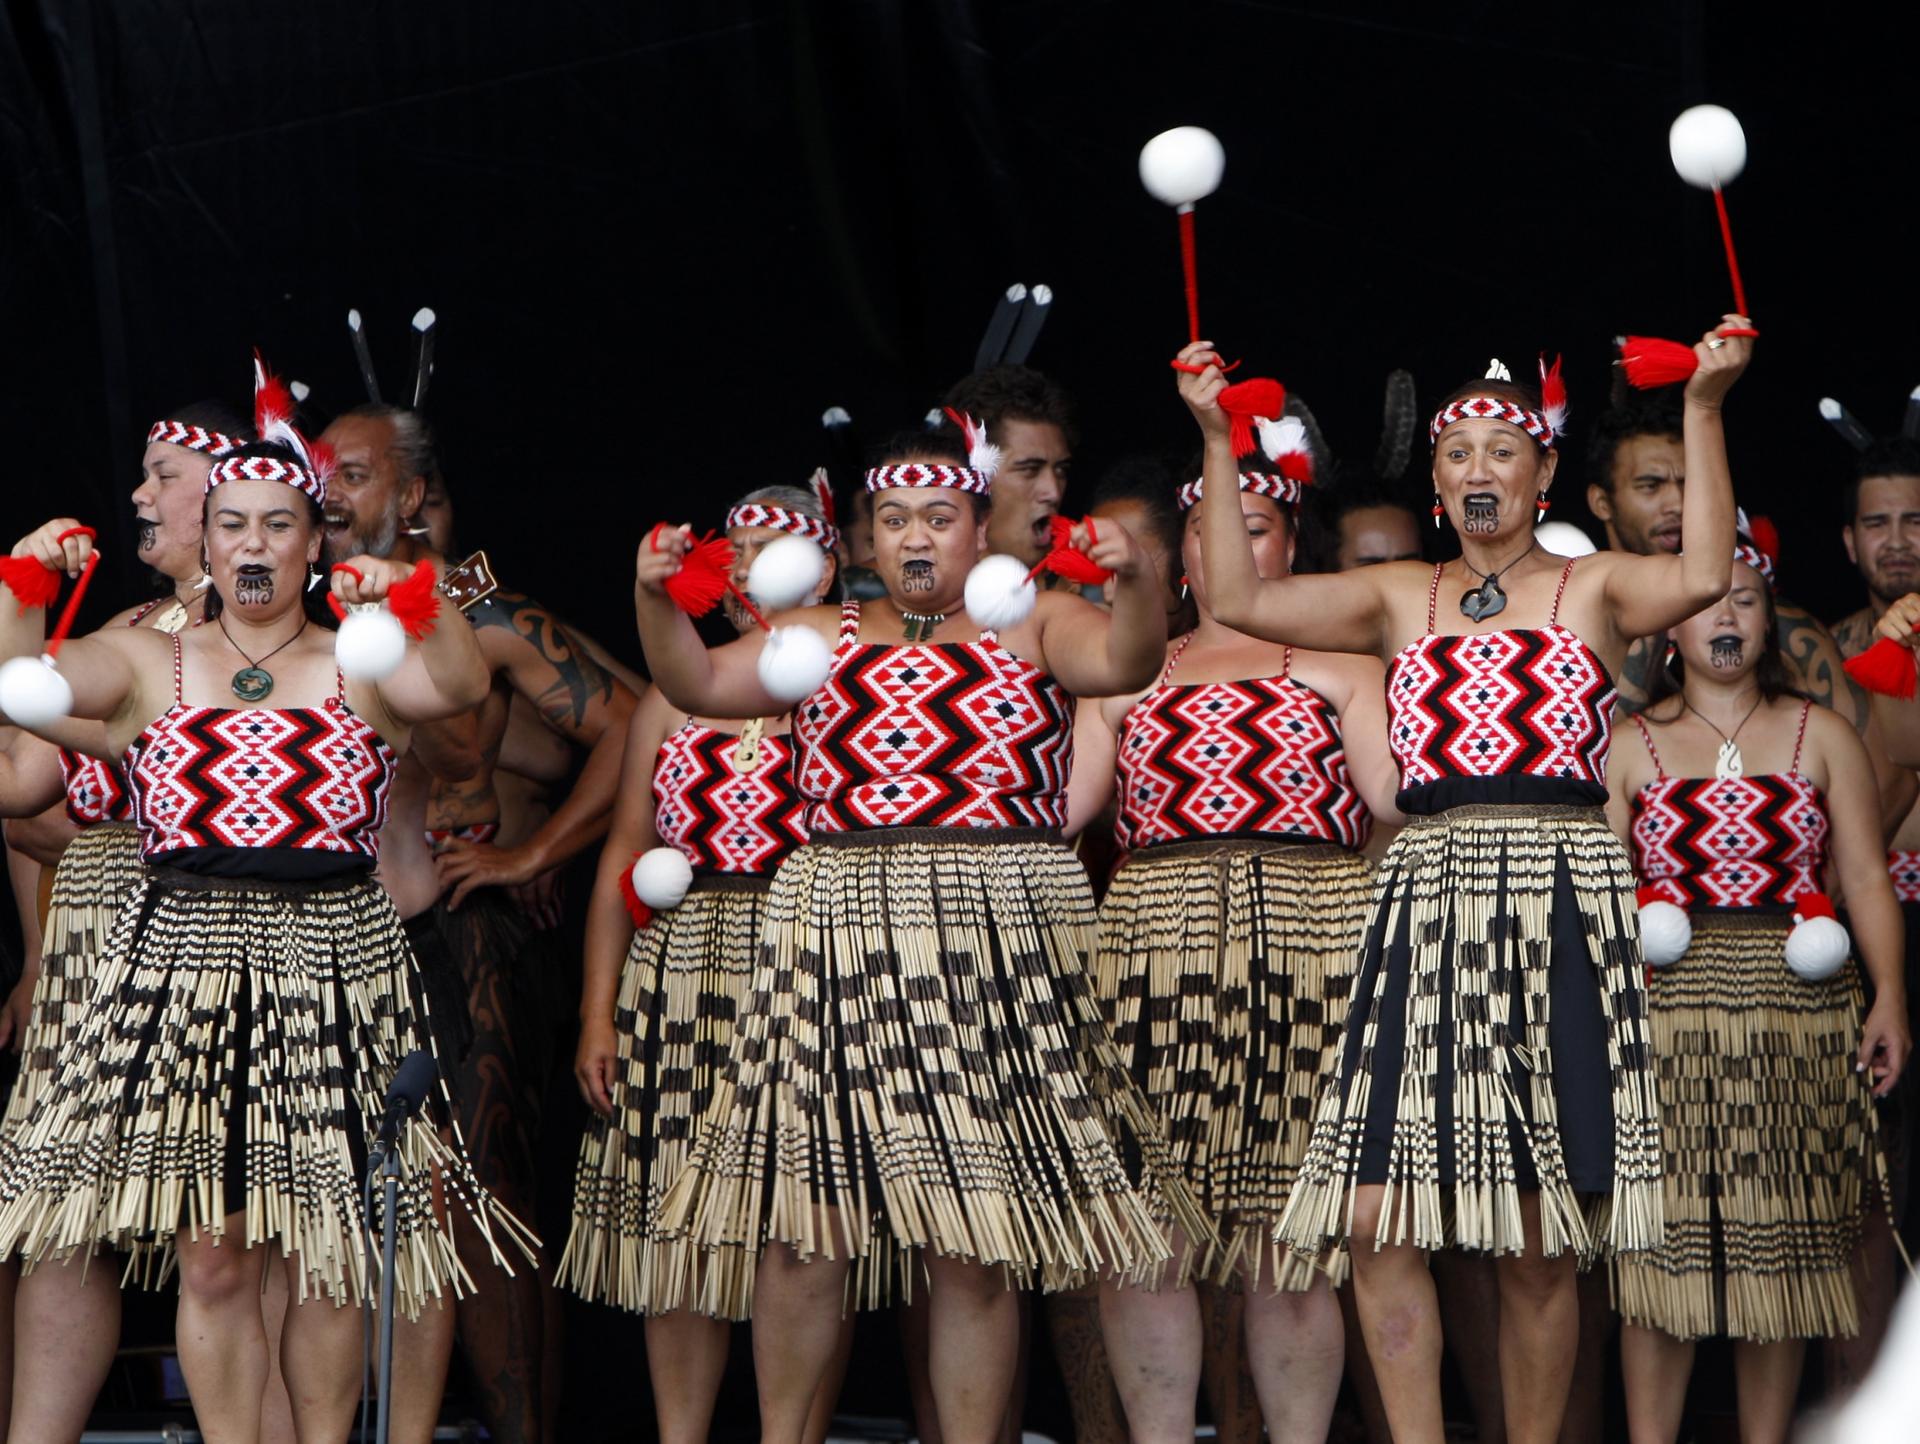 In this Feb. 6, 2015 photo, dancers twirl white "poi" balls as part of an indigenous Maori performance, in Waitangi, New Zealand, to mark the 175th anniversary of the signing of the country's founding document, the Treaty of Waitangi.